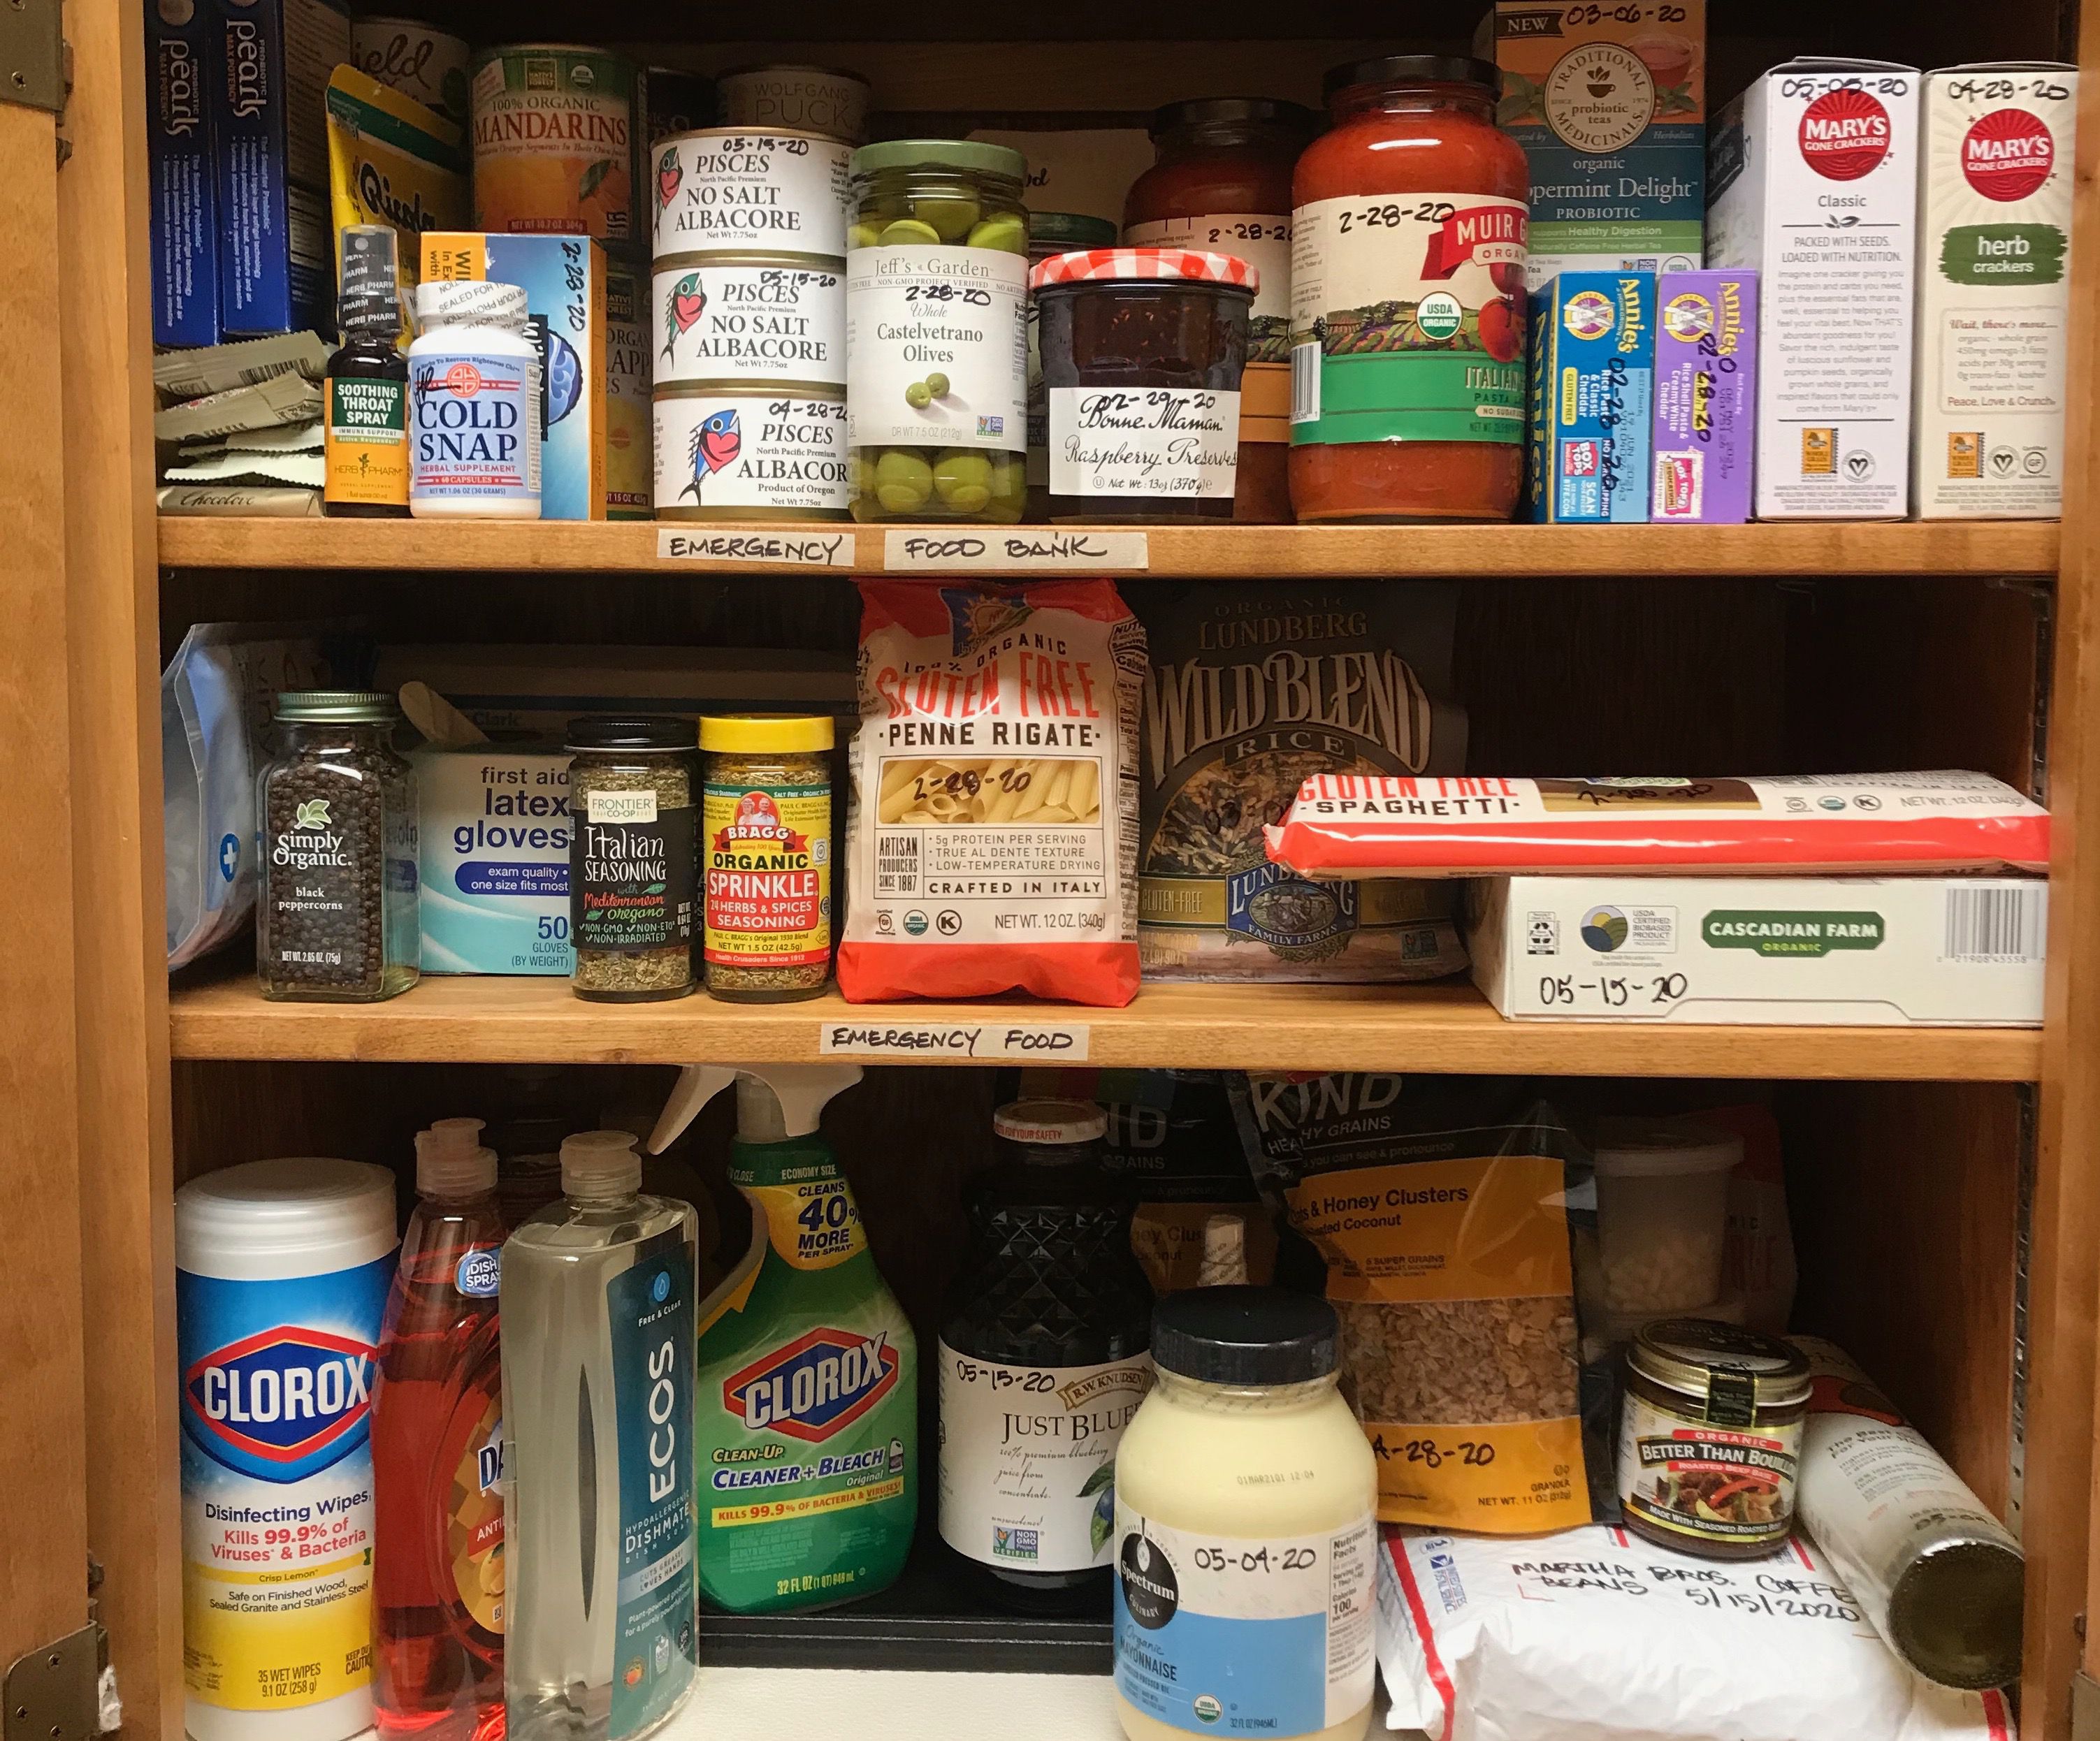 Building Up A Well-Stocked Pantry & Long-Term Food Storage Supply